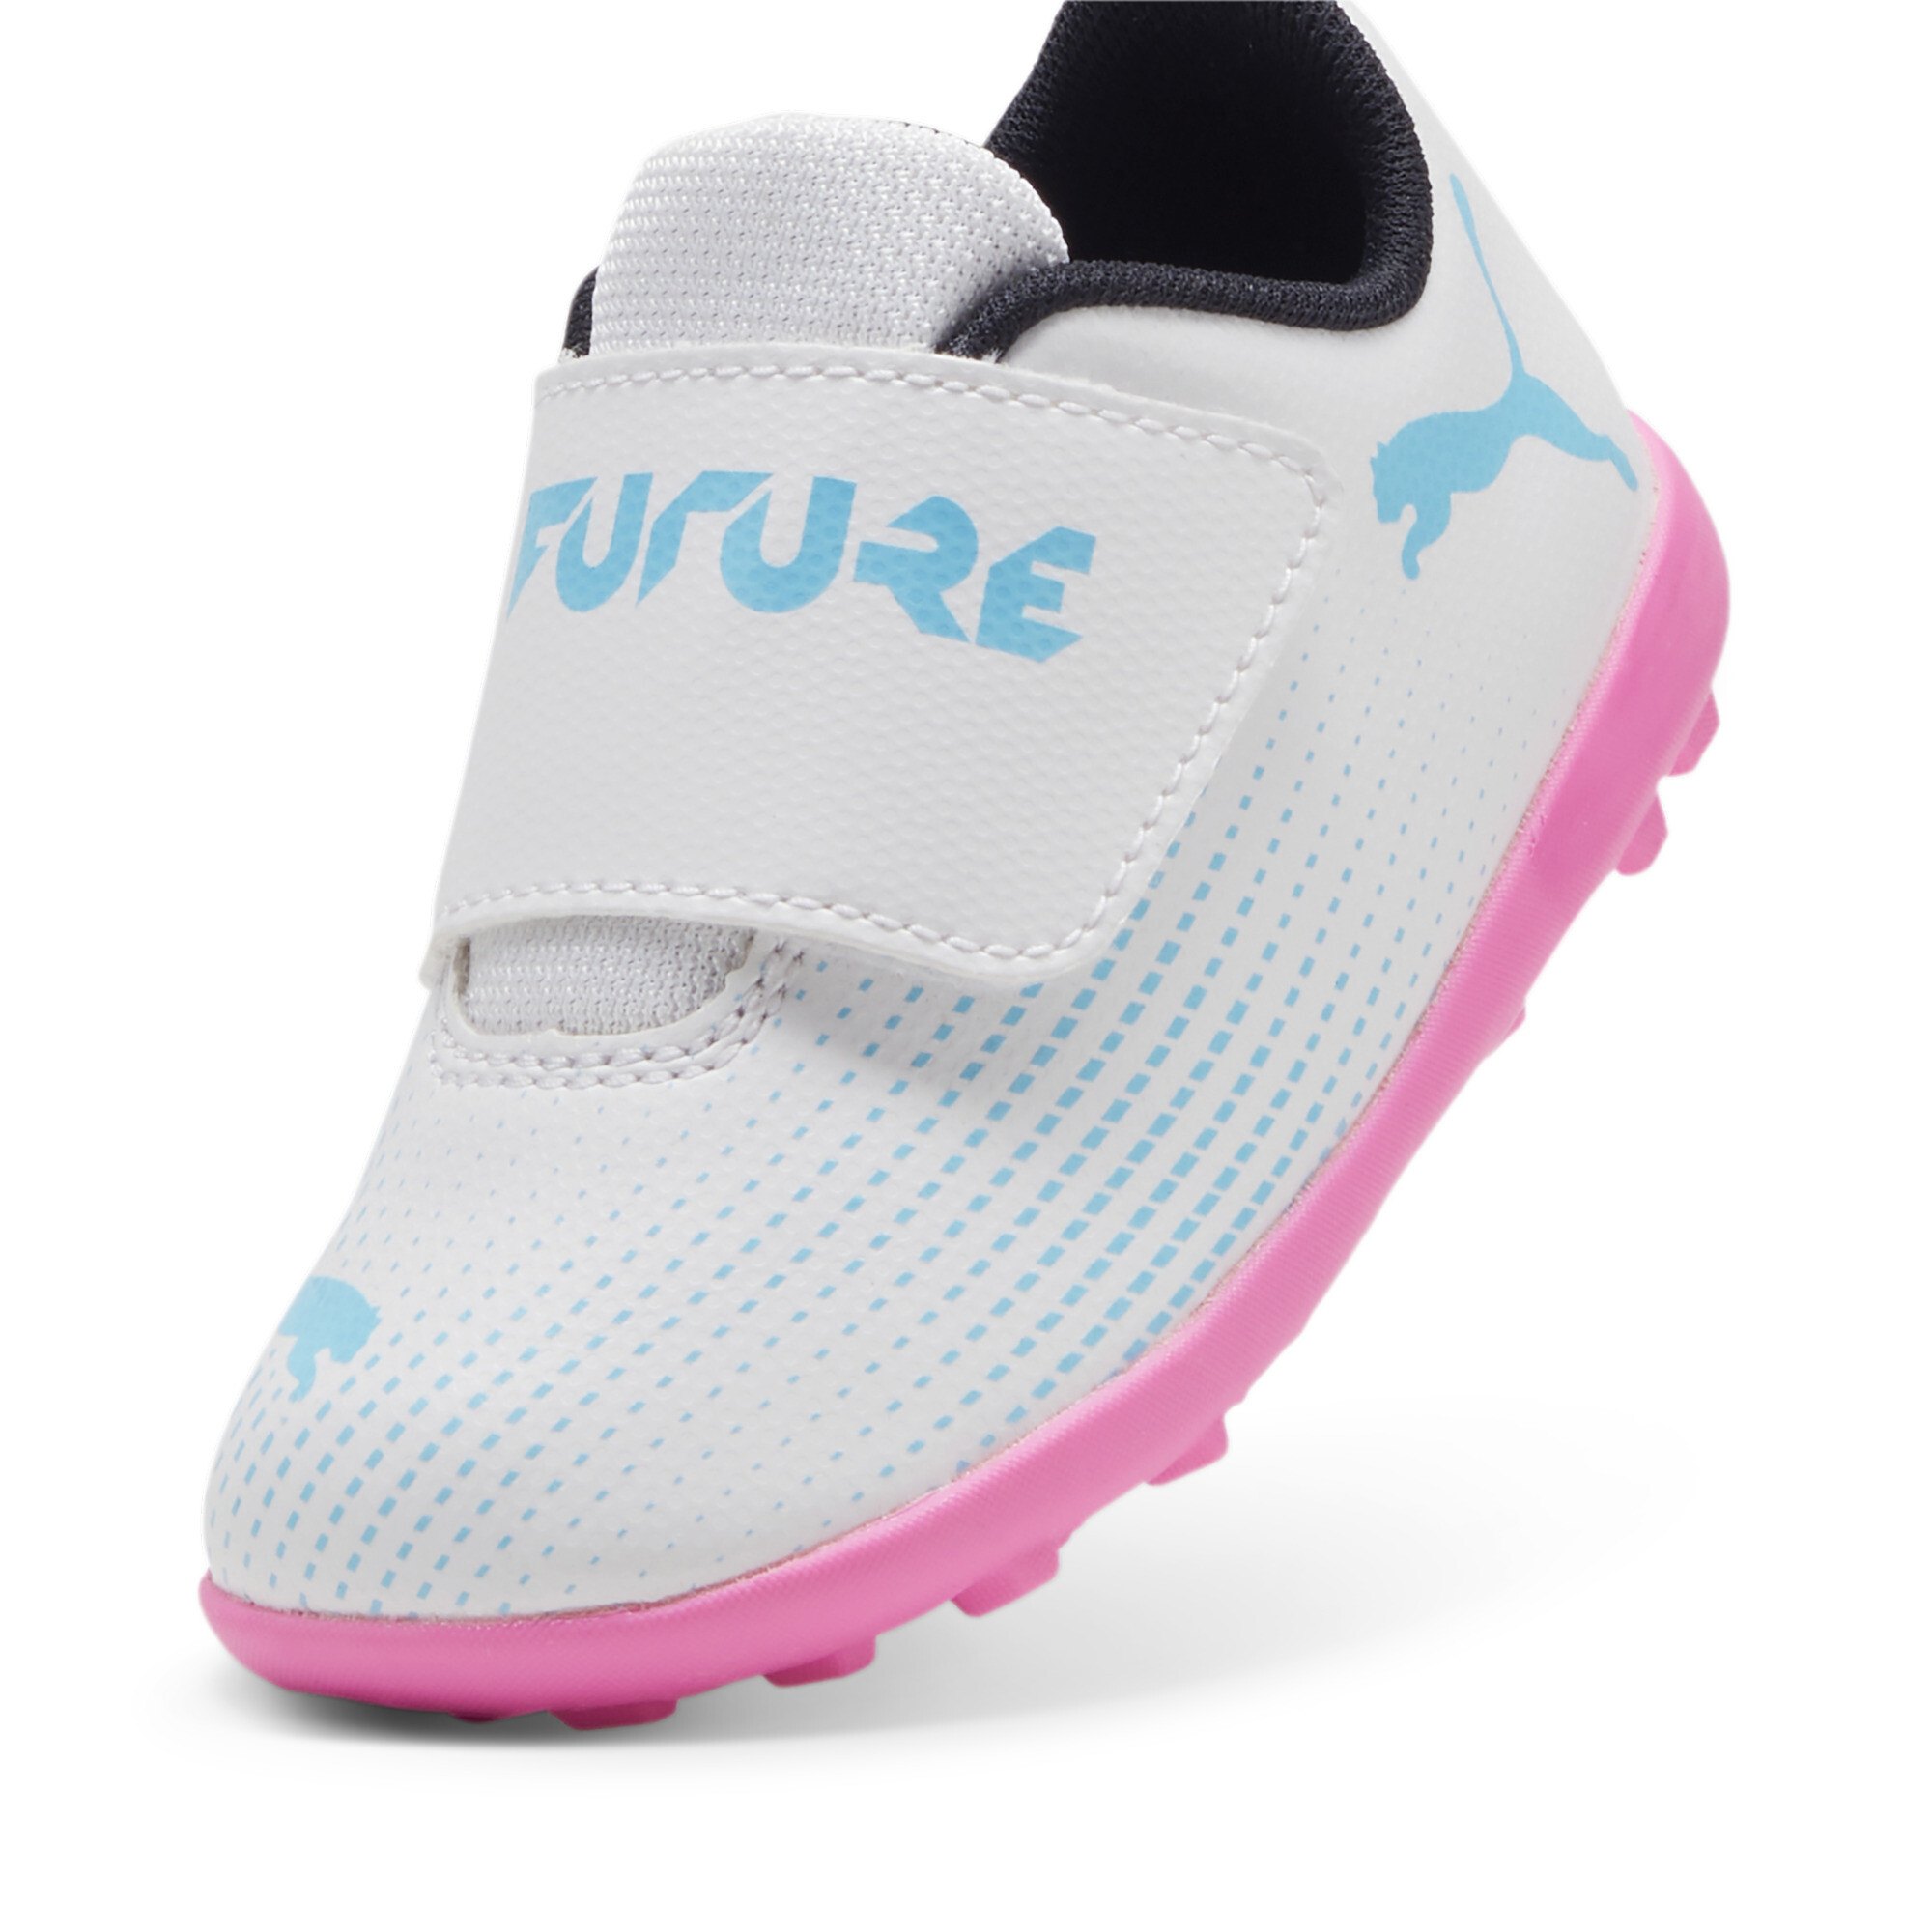 Kids' PUMA FUTURE 7 PLAY TT Toddlers' Football Boots In White/Pink, Size EU 25